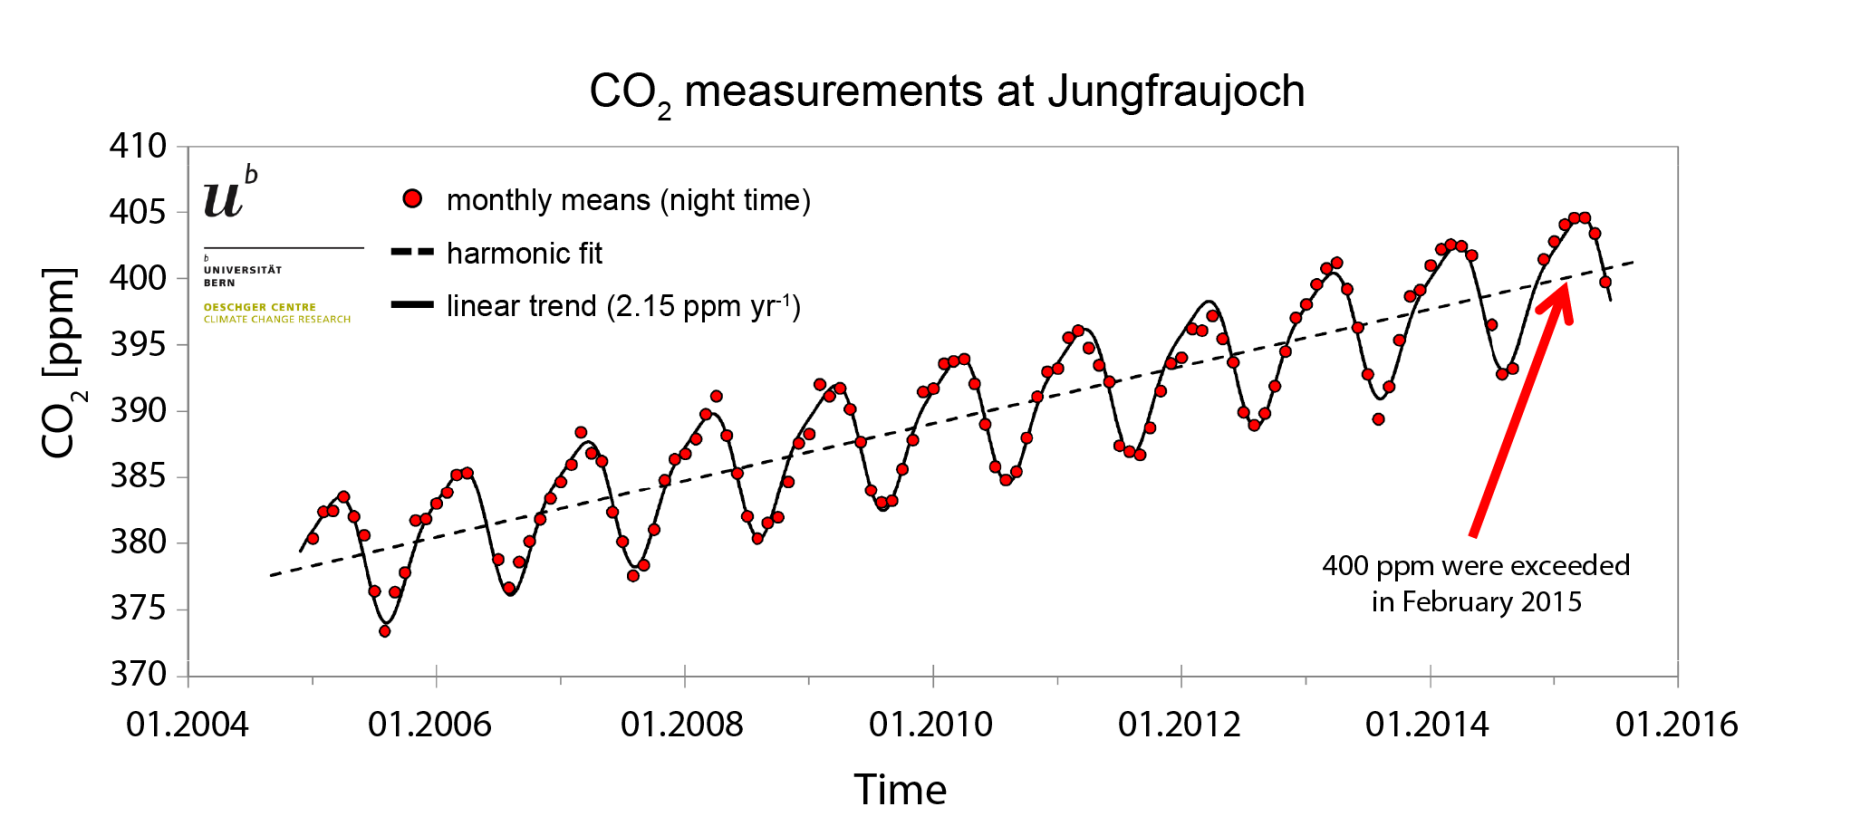 Increasing CO2 concentration (in ppm) measured at Jungfraujoch